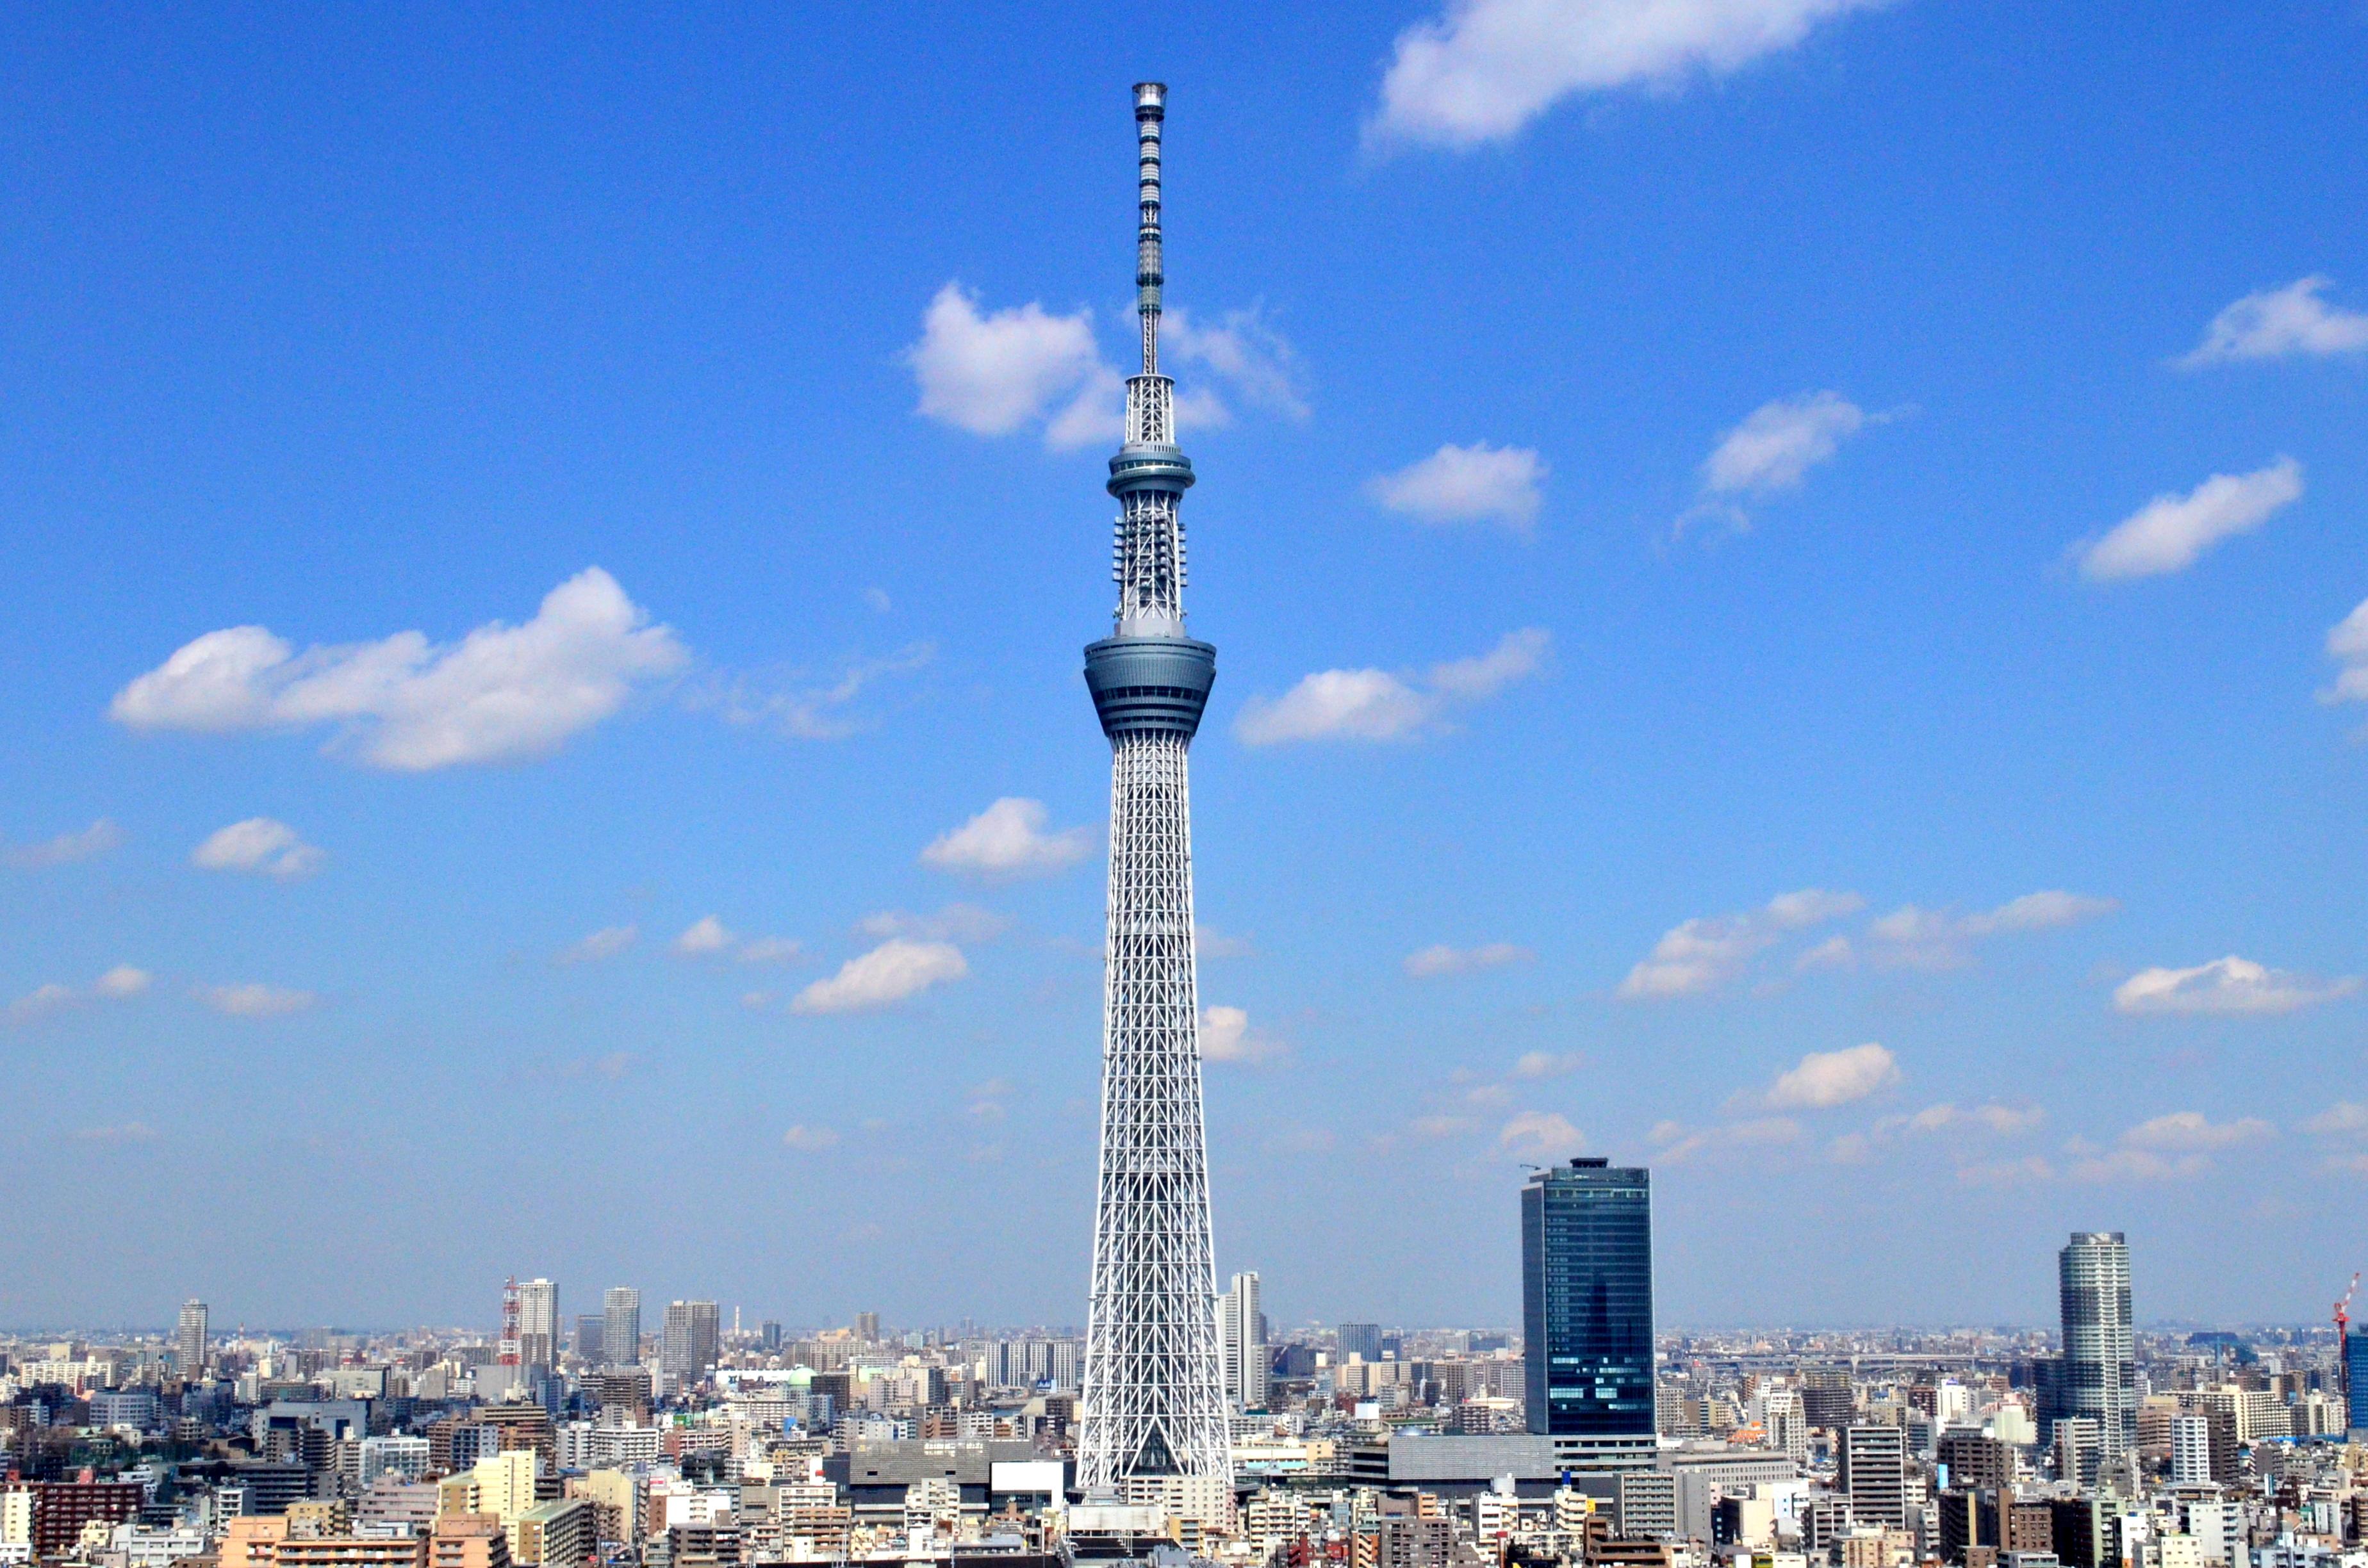 Top 10 tallest towers in Japan